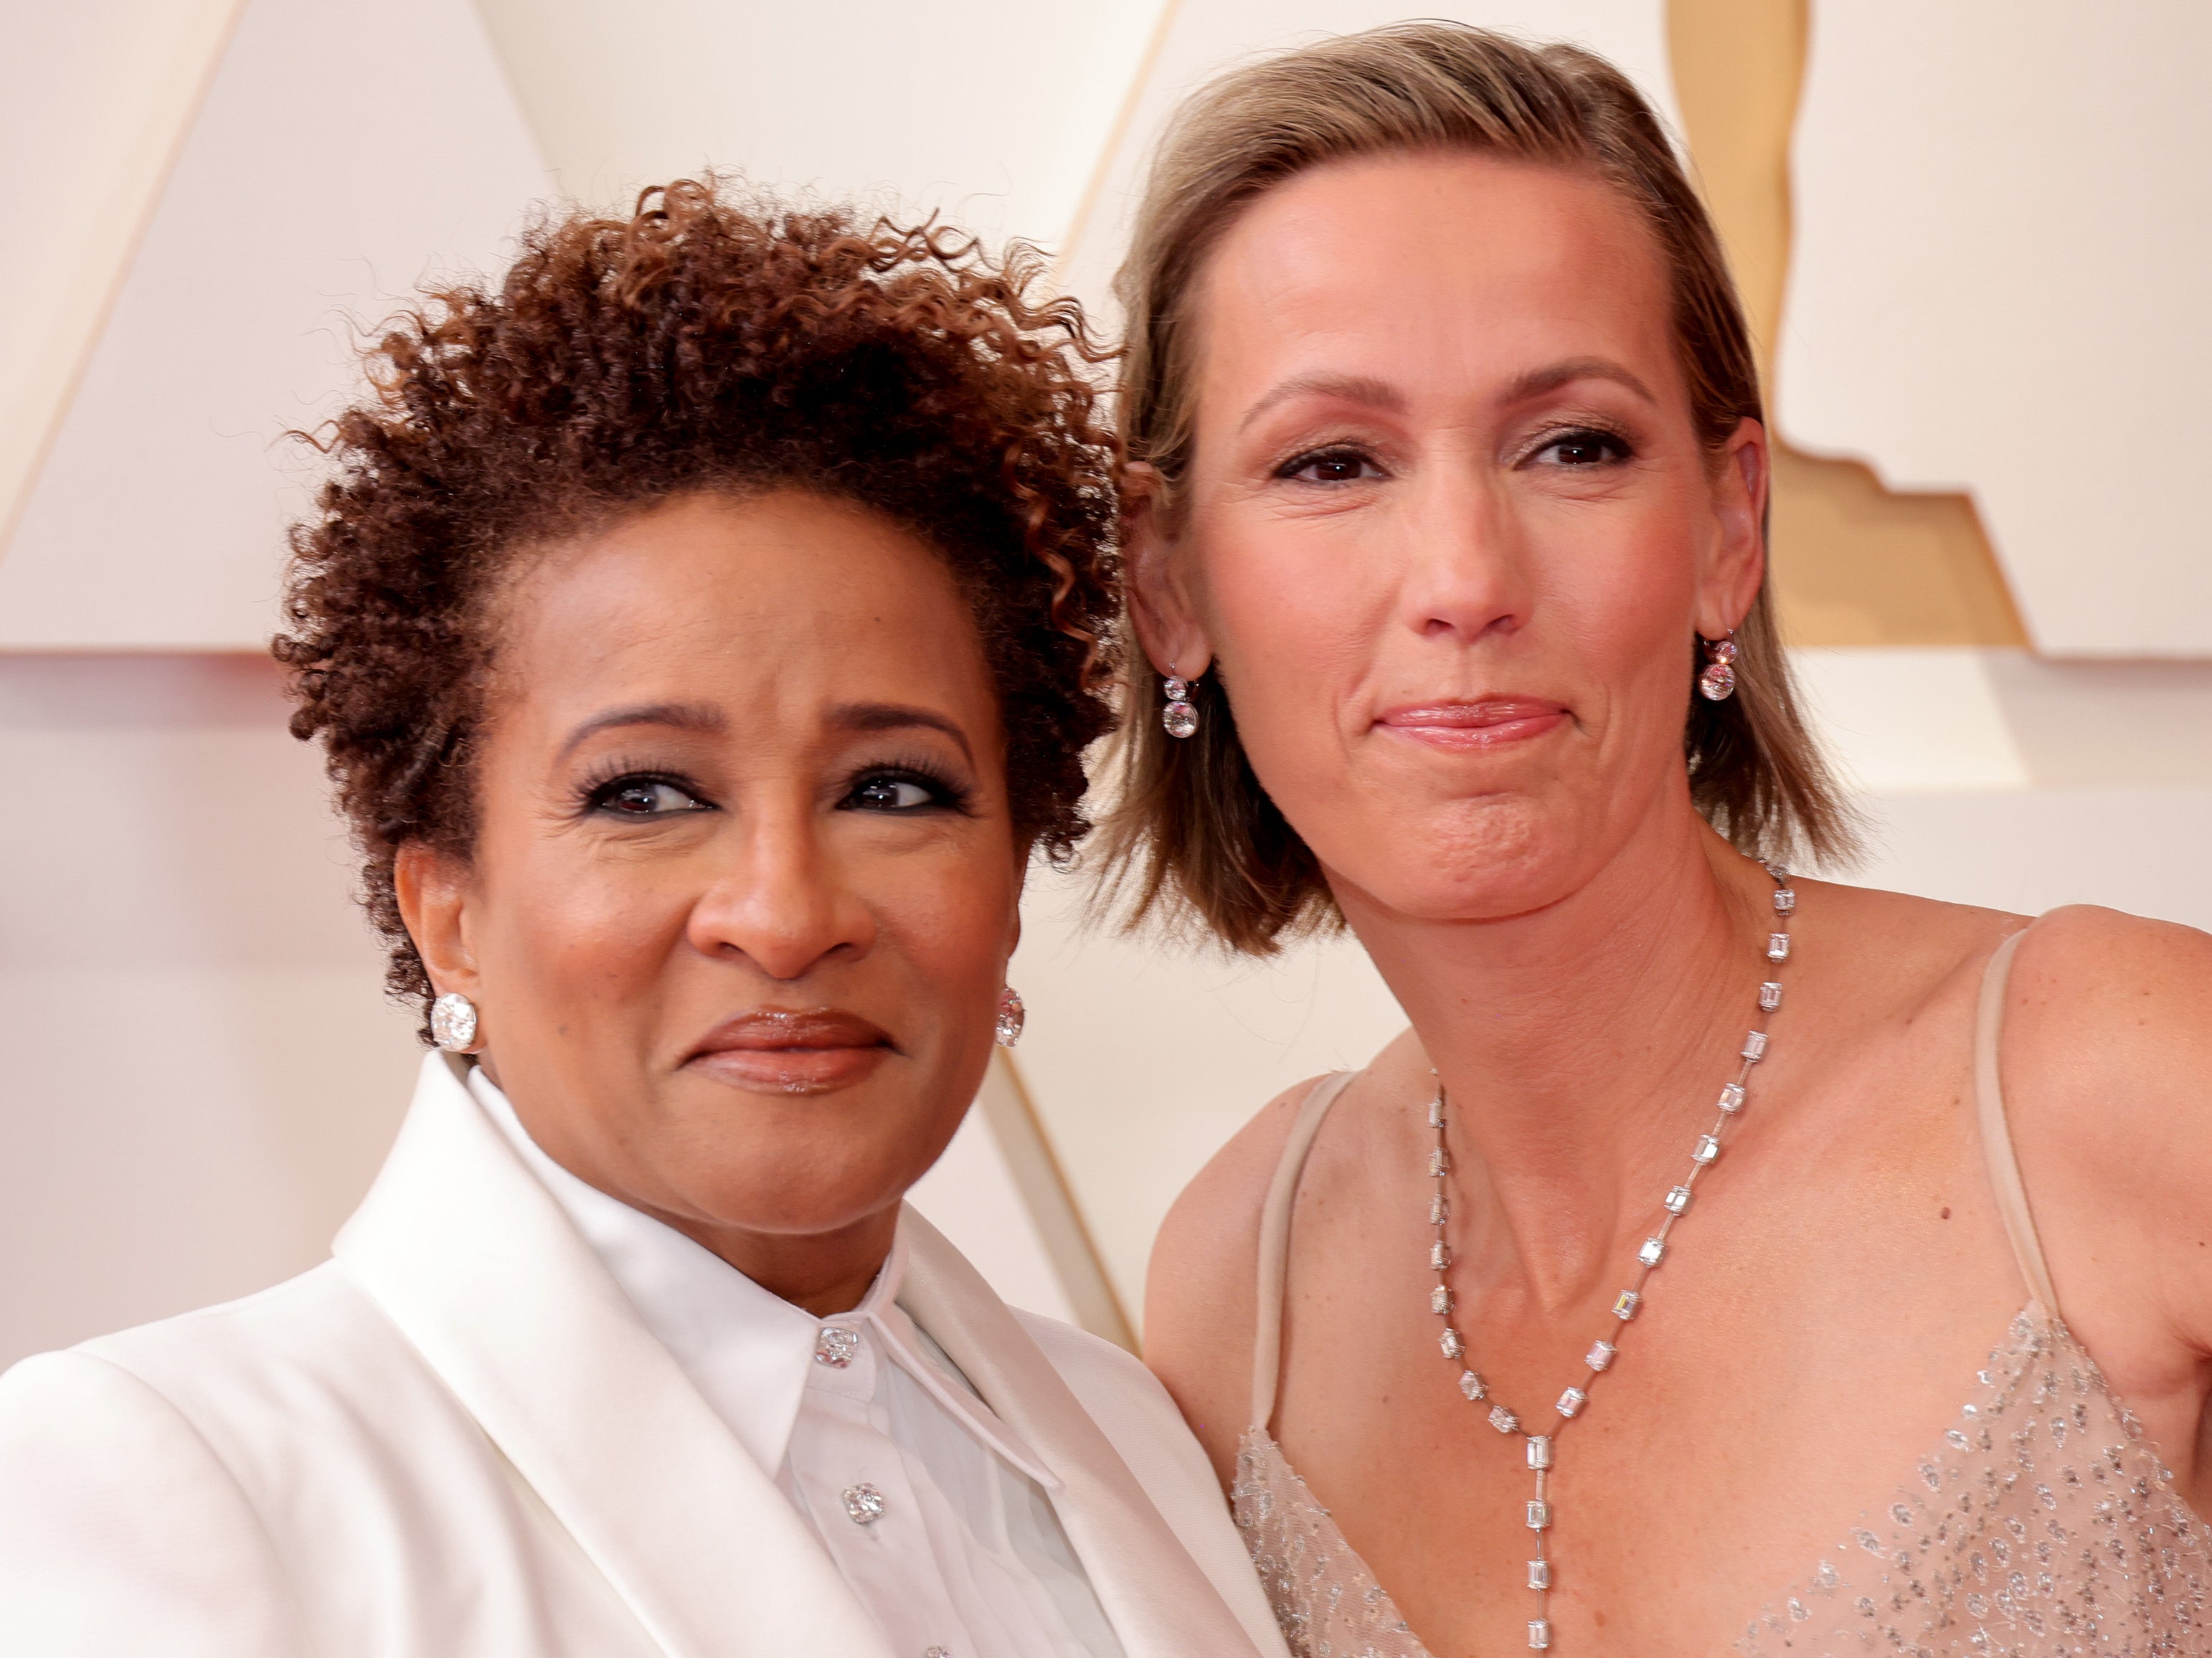 Wanda Sykes with her wife, Alex, on the Oscars red carpet